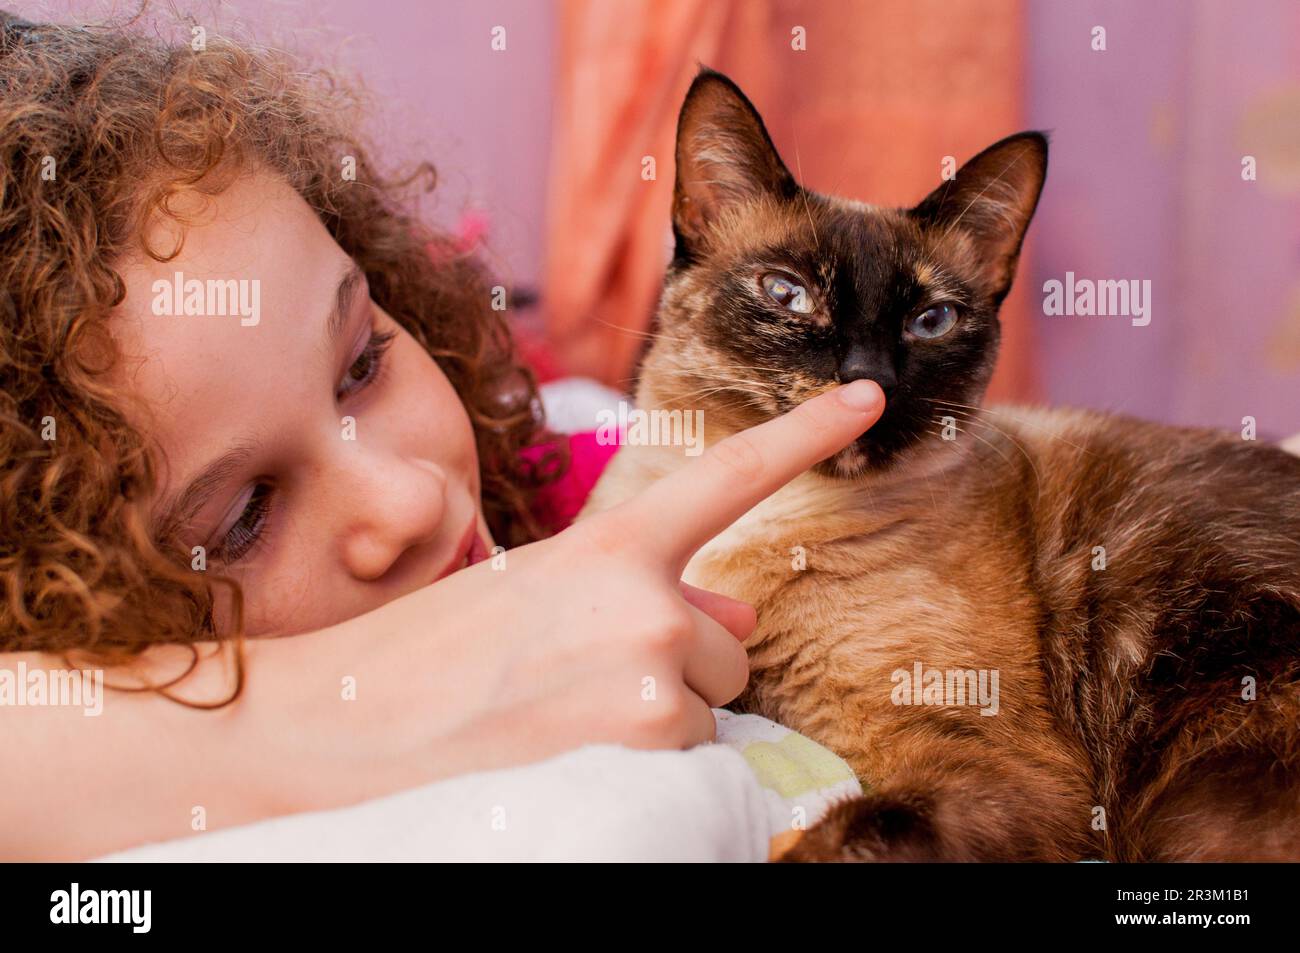 Portrait of girl touching a kitten's nose Stock Photo